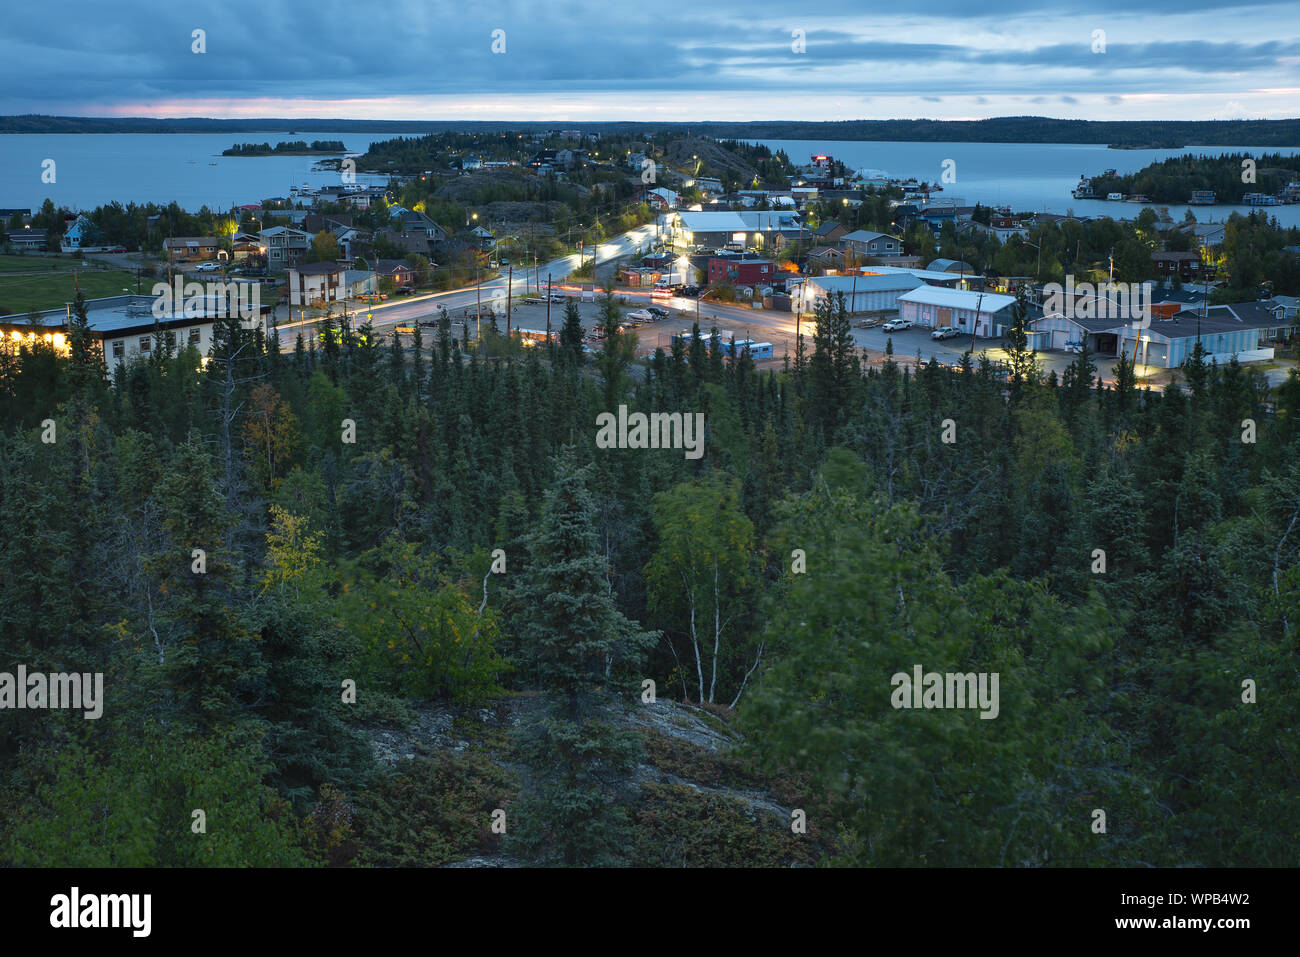 Abend in Yellowknife, Nordwest-territorien, Canad Stockfoto